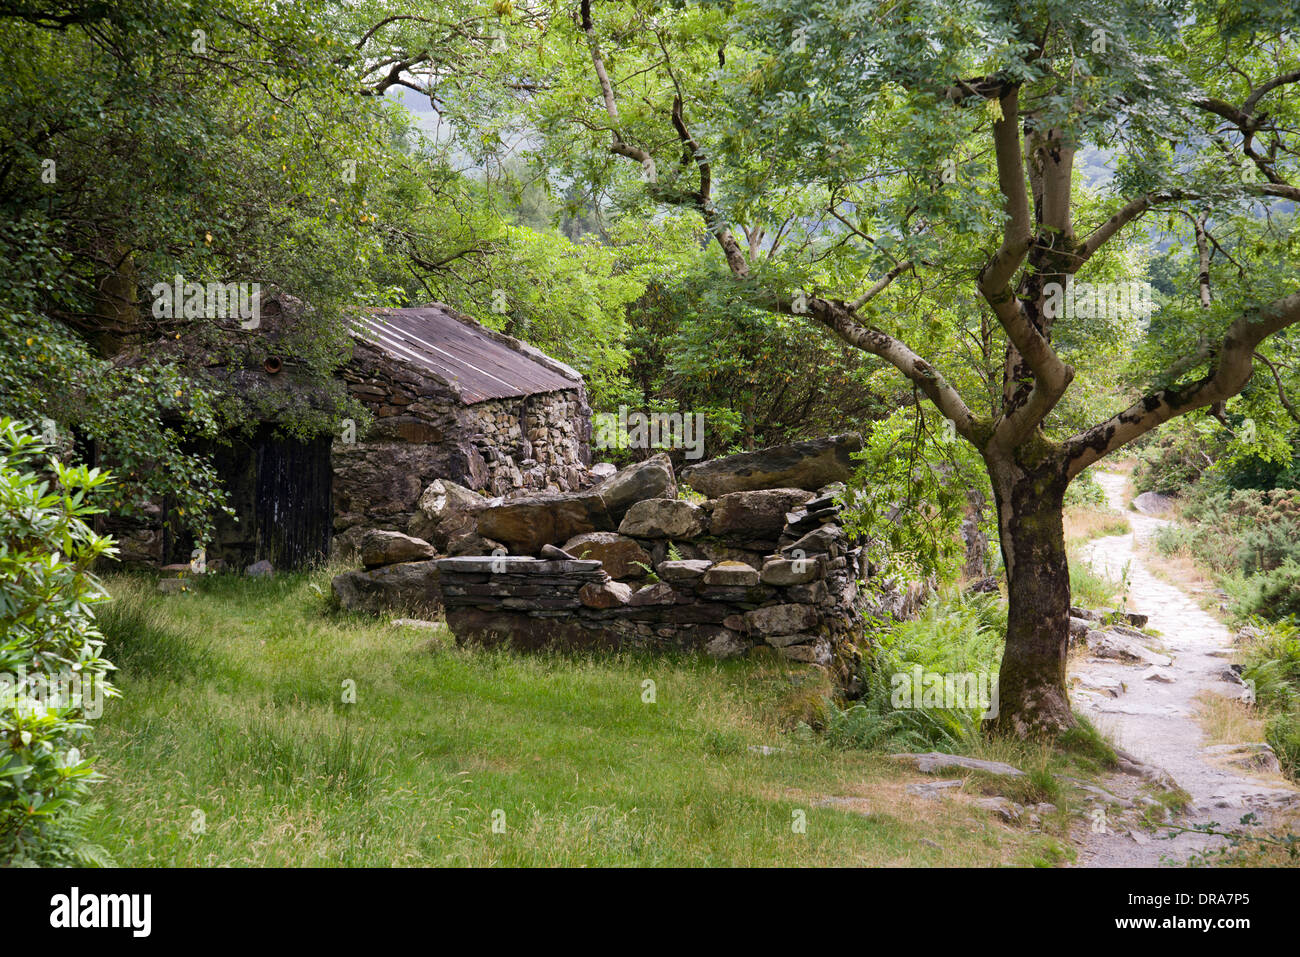 Walking, walkers, hiking, winding path, trees, wide open spaces, vacation, holiday, summer, ram shackle house, abandoned, river Stock Photo